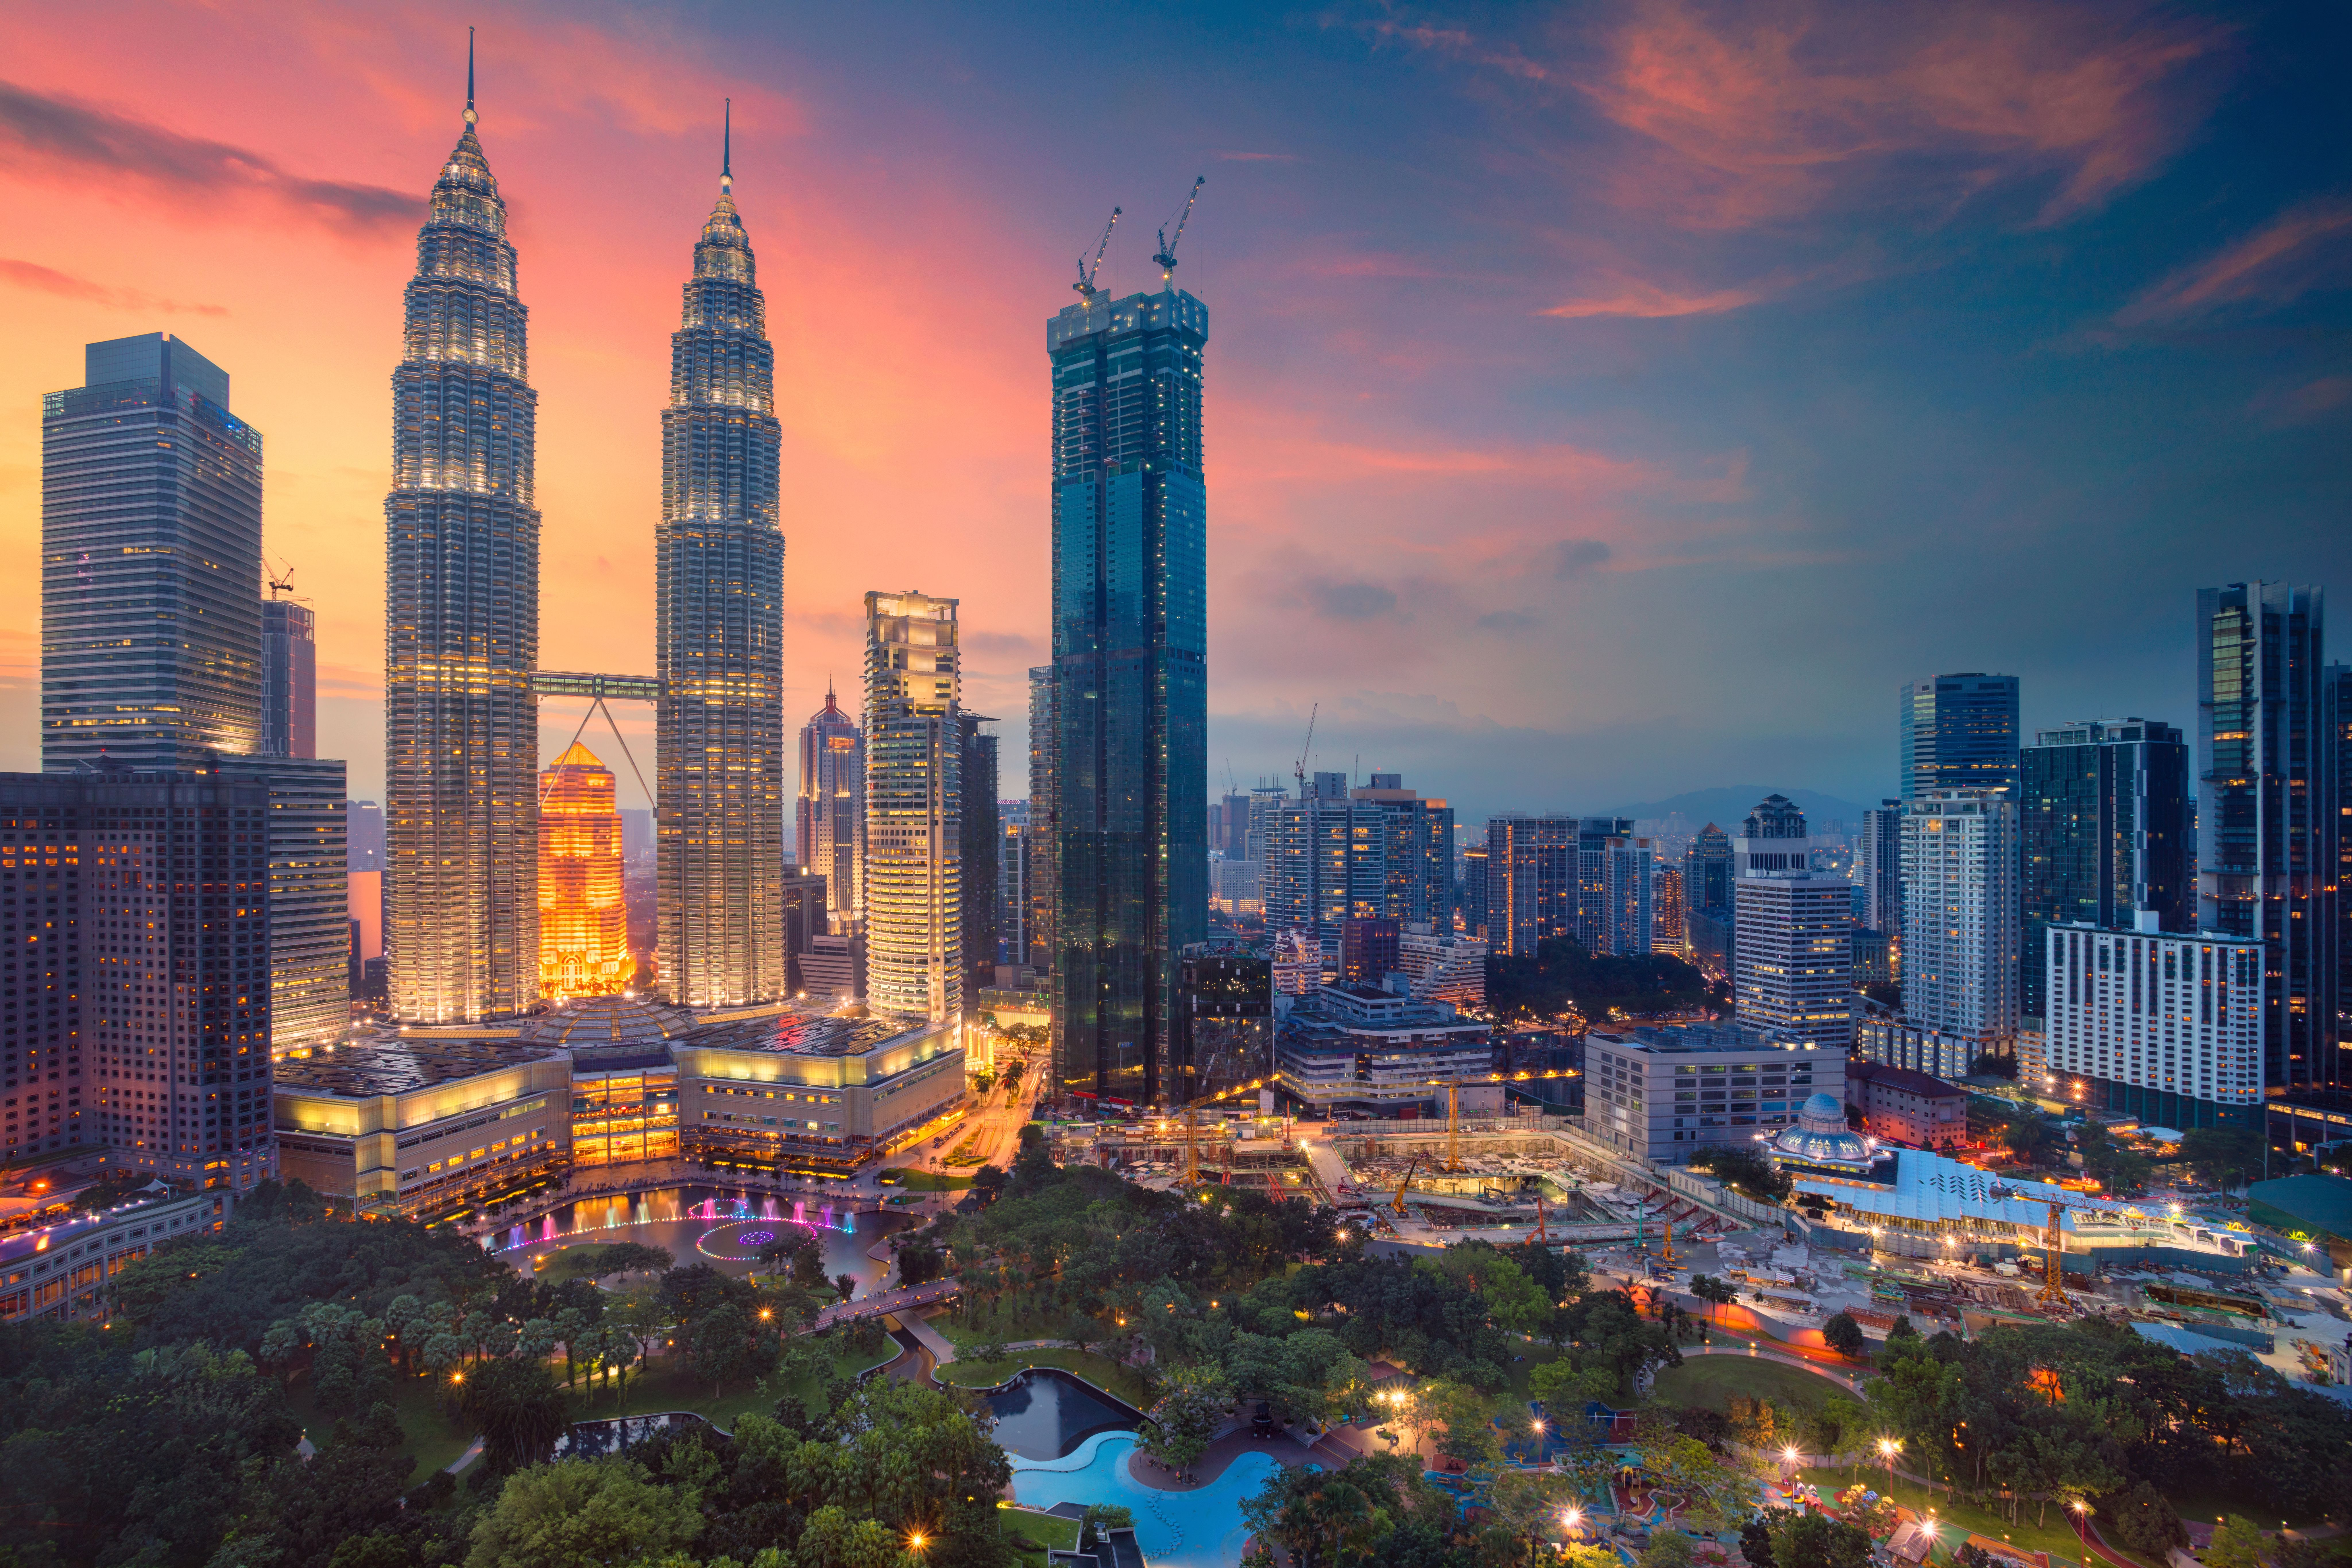 The 38th Asia-Pacific Academy of Ophthalmology (APAO) Congress will take place February 23-26, 2023, at the Kuala Lumpur Convention Centre, Malaysia.